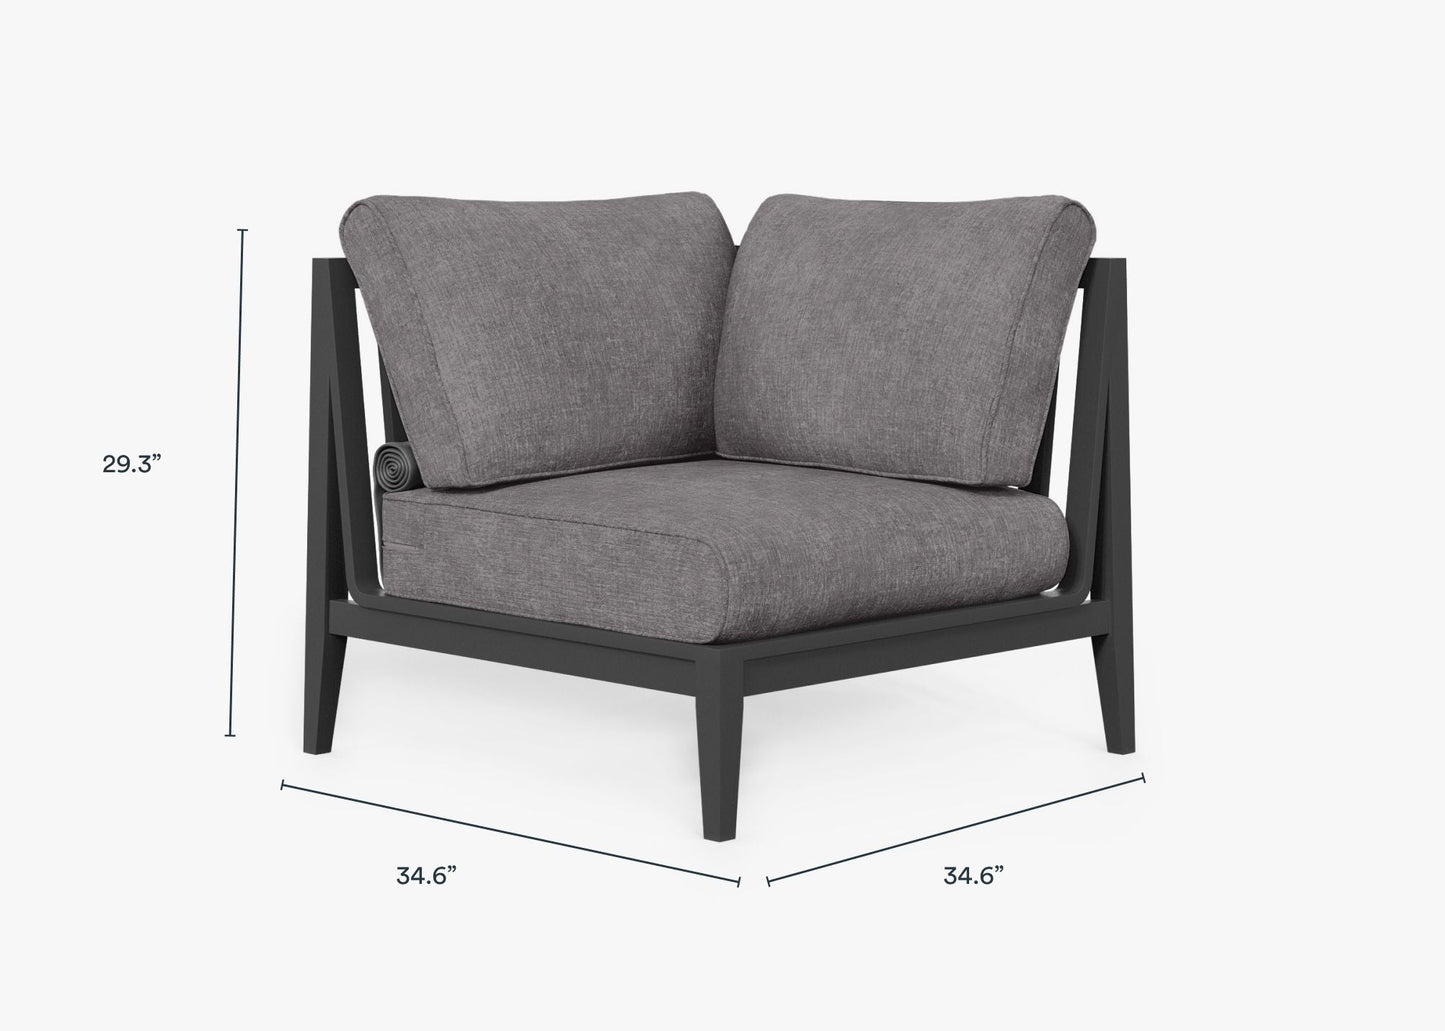 Live Outer 35" Charcoal Aluminum Left Corner Chair With Dark Pebble Gray Cushion